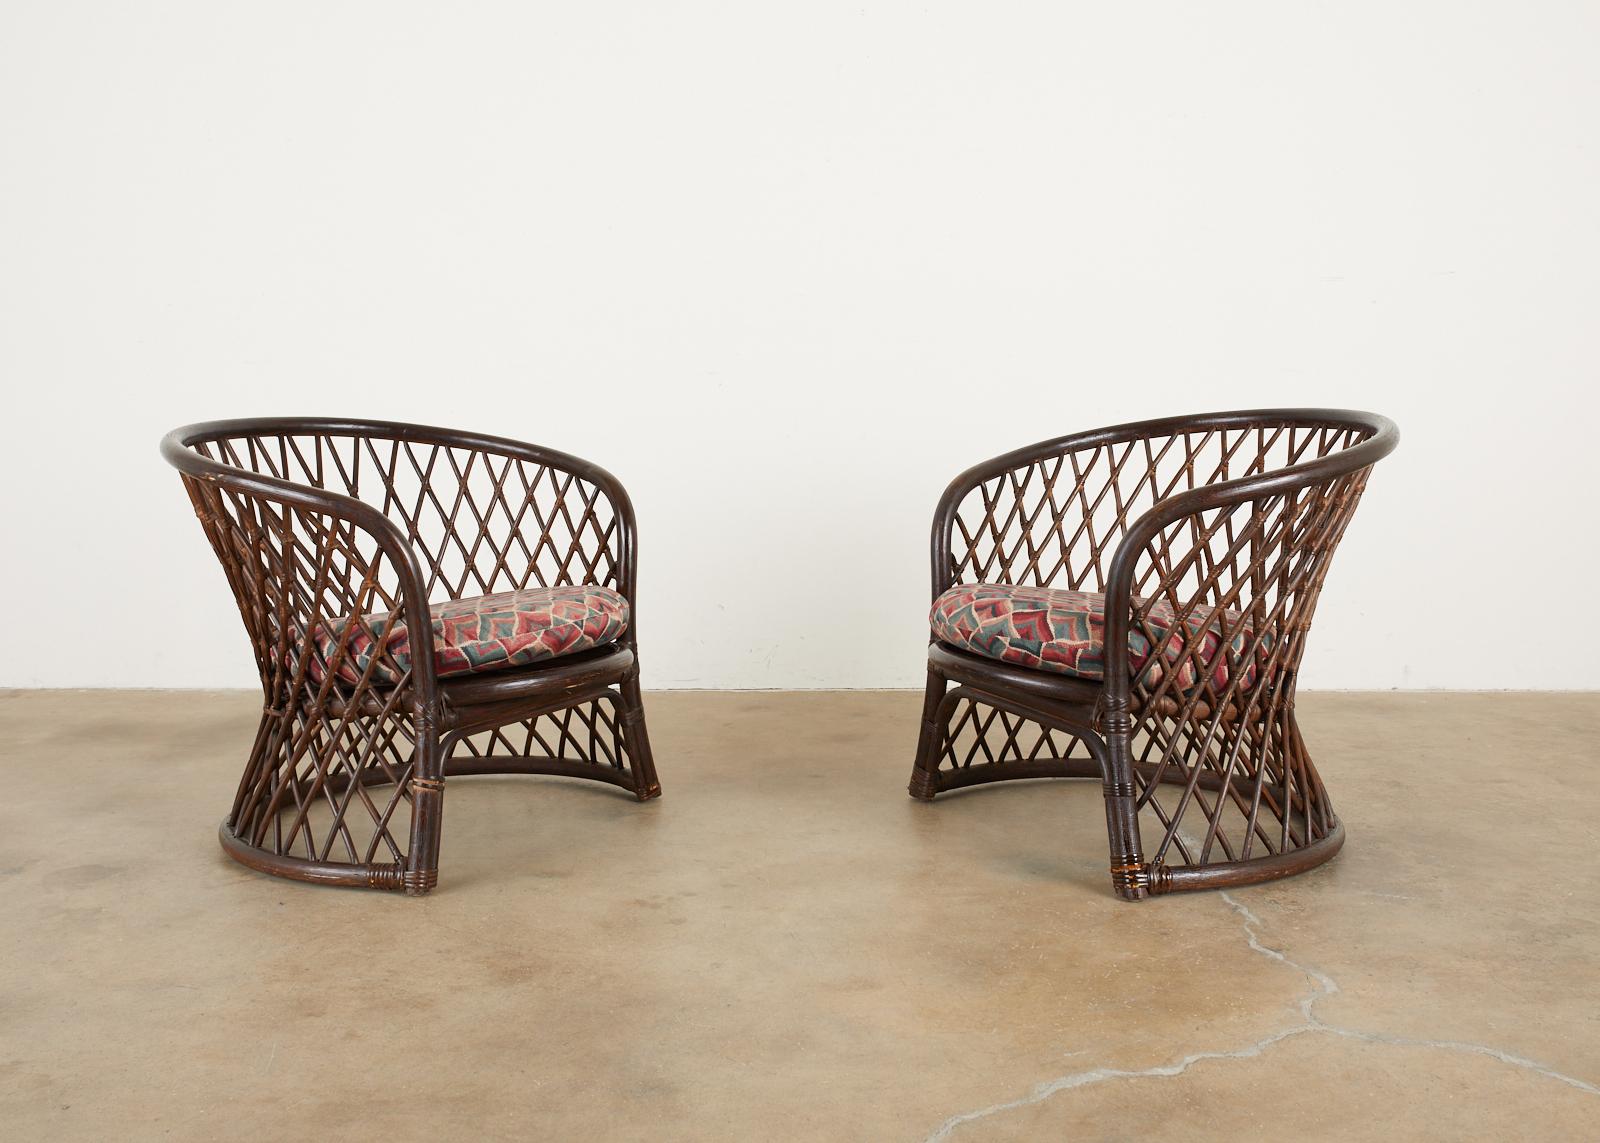 Hand-Crafted Pair of Brown Jordan Rattan Wicker Club Chairs